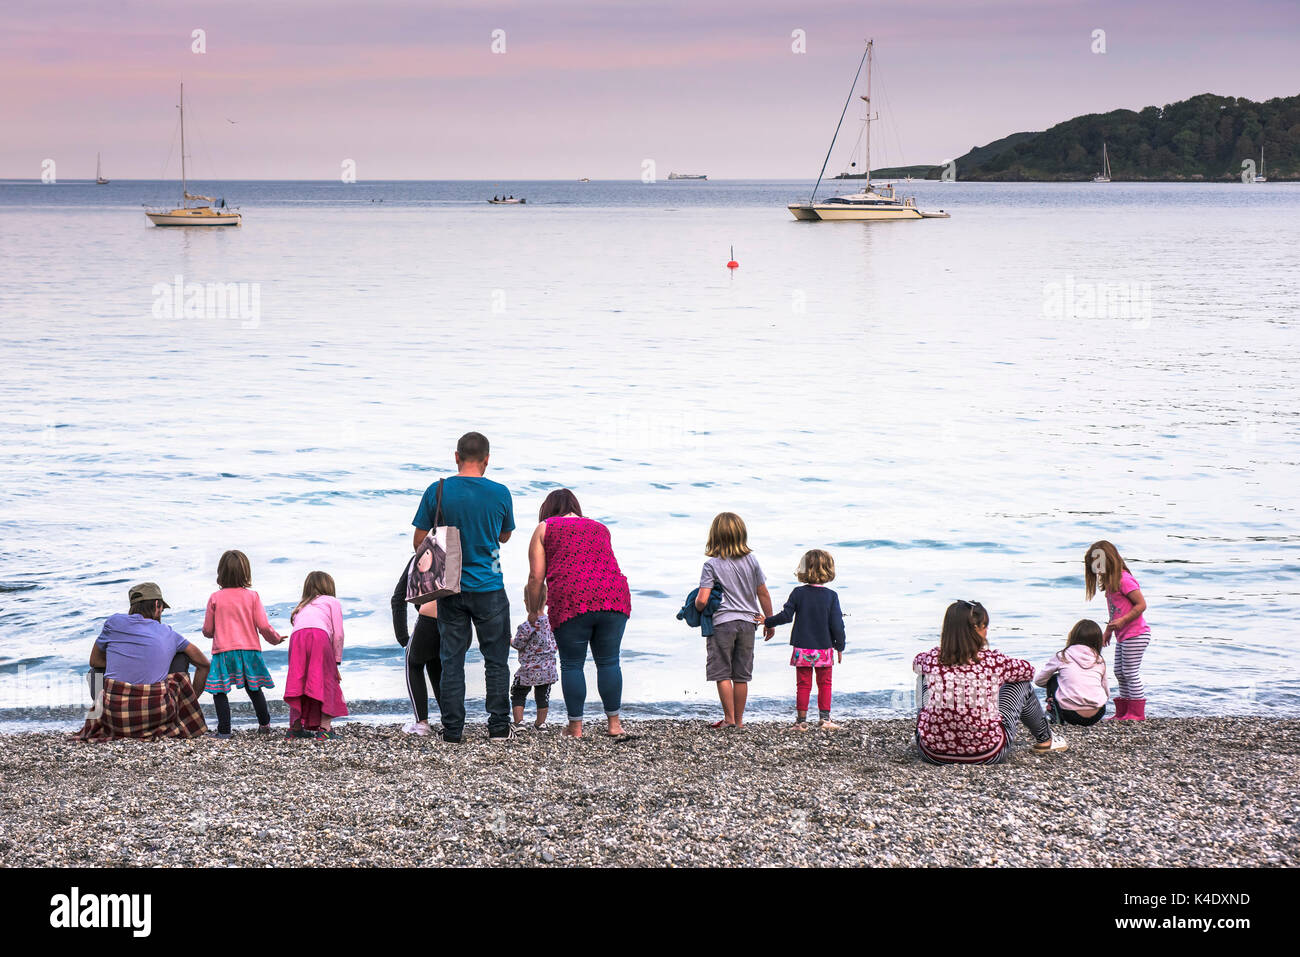 Trebah Garden Beach - adults and children standing on the shoreline of the beach at Trebah Garden in Cornwall. Stock Photo